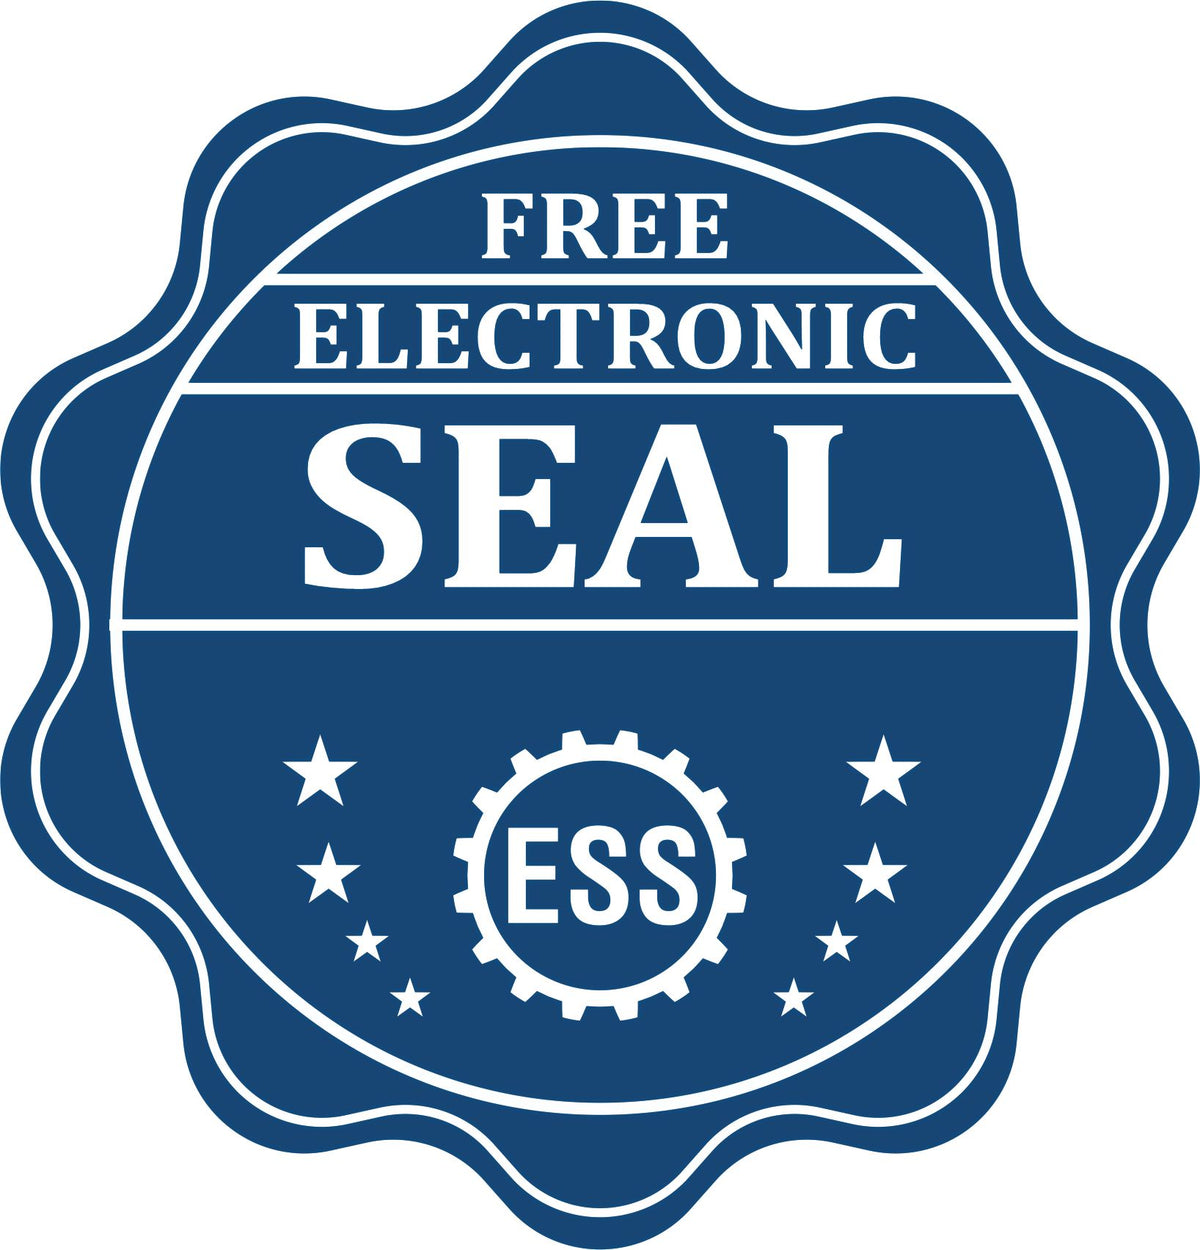 A badge showing a free electronic seal for the State of Connecticut Architectural Seal Embosser with stars and the ESS gear on the emblem.